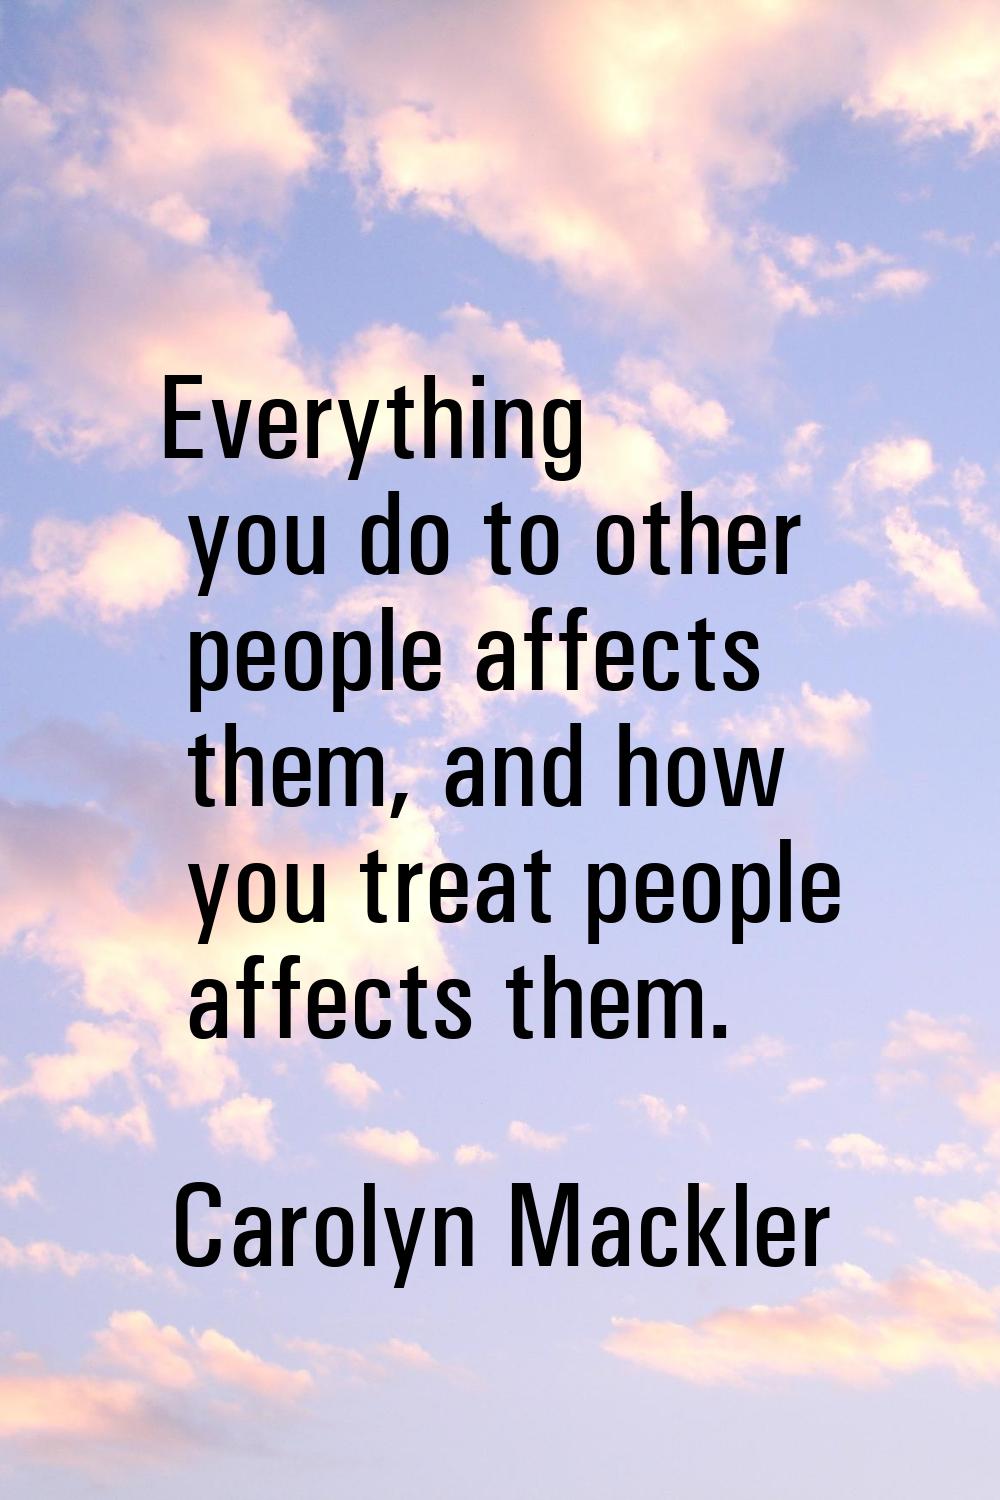 Everything you do to other people affects them, and how you treat people affects them.